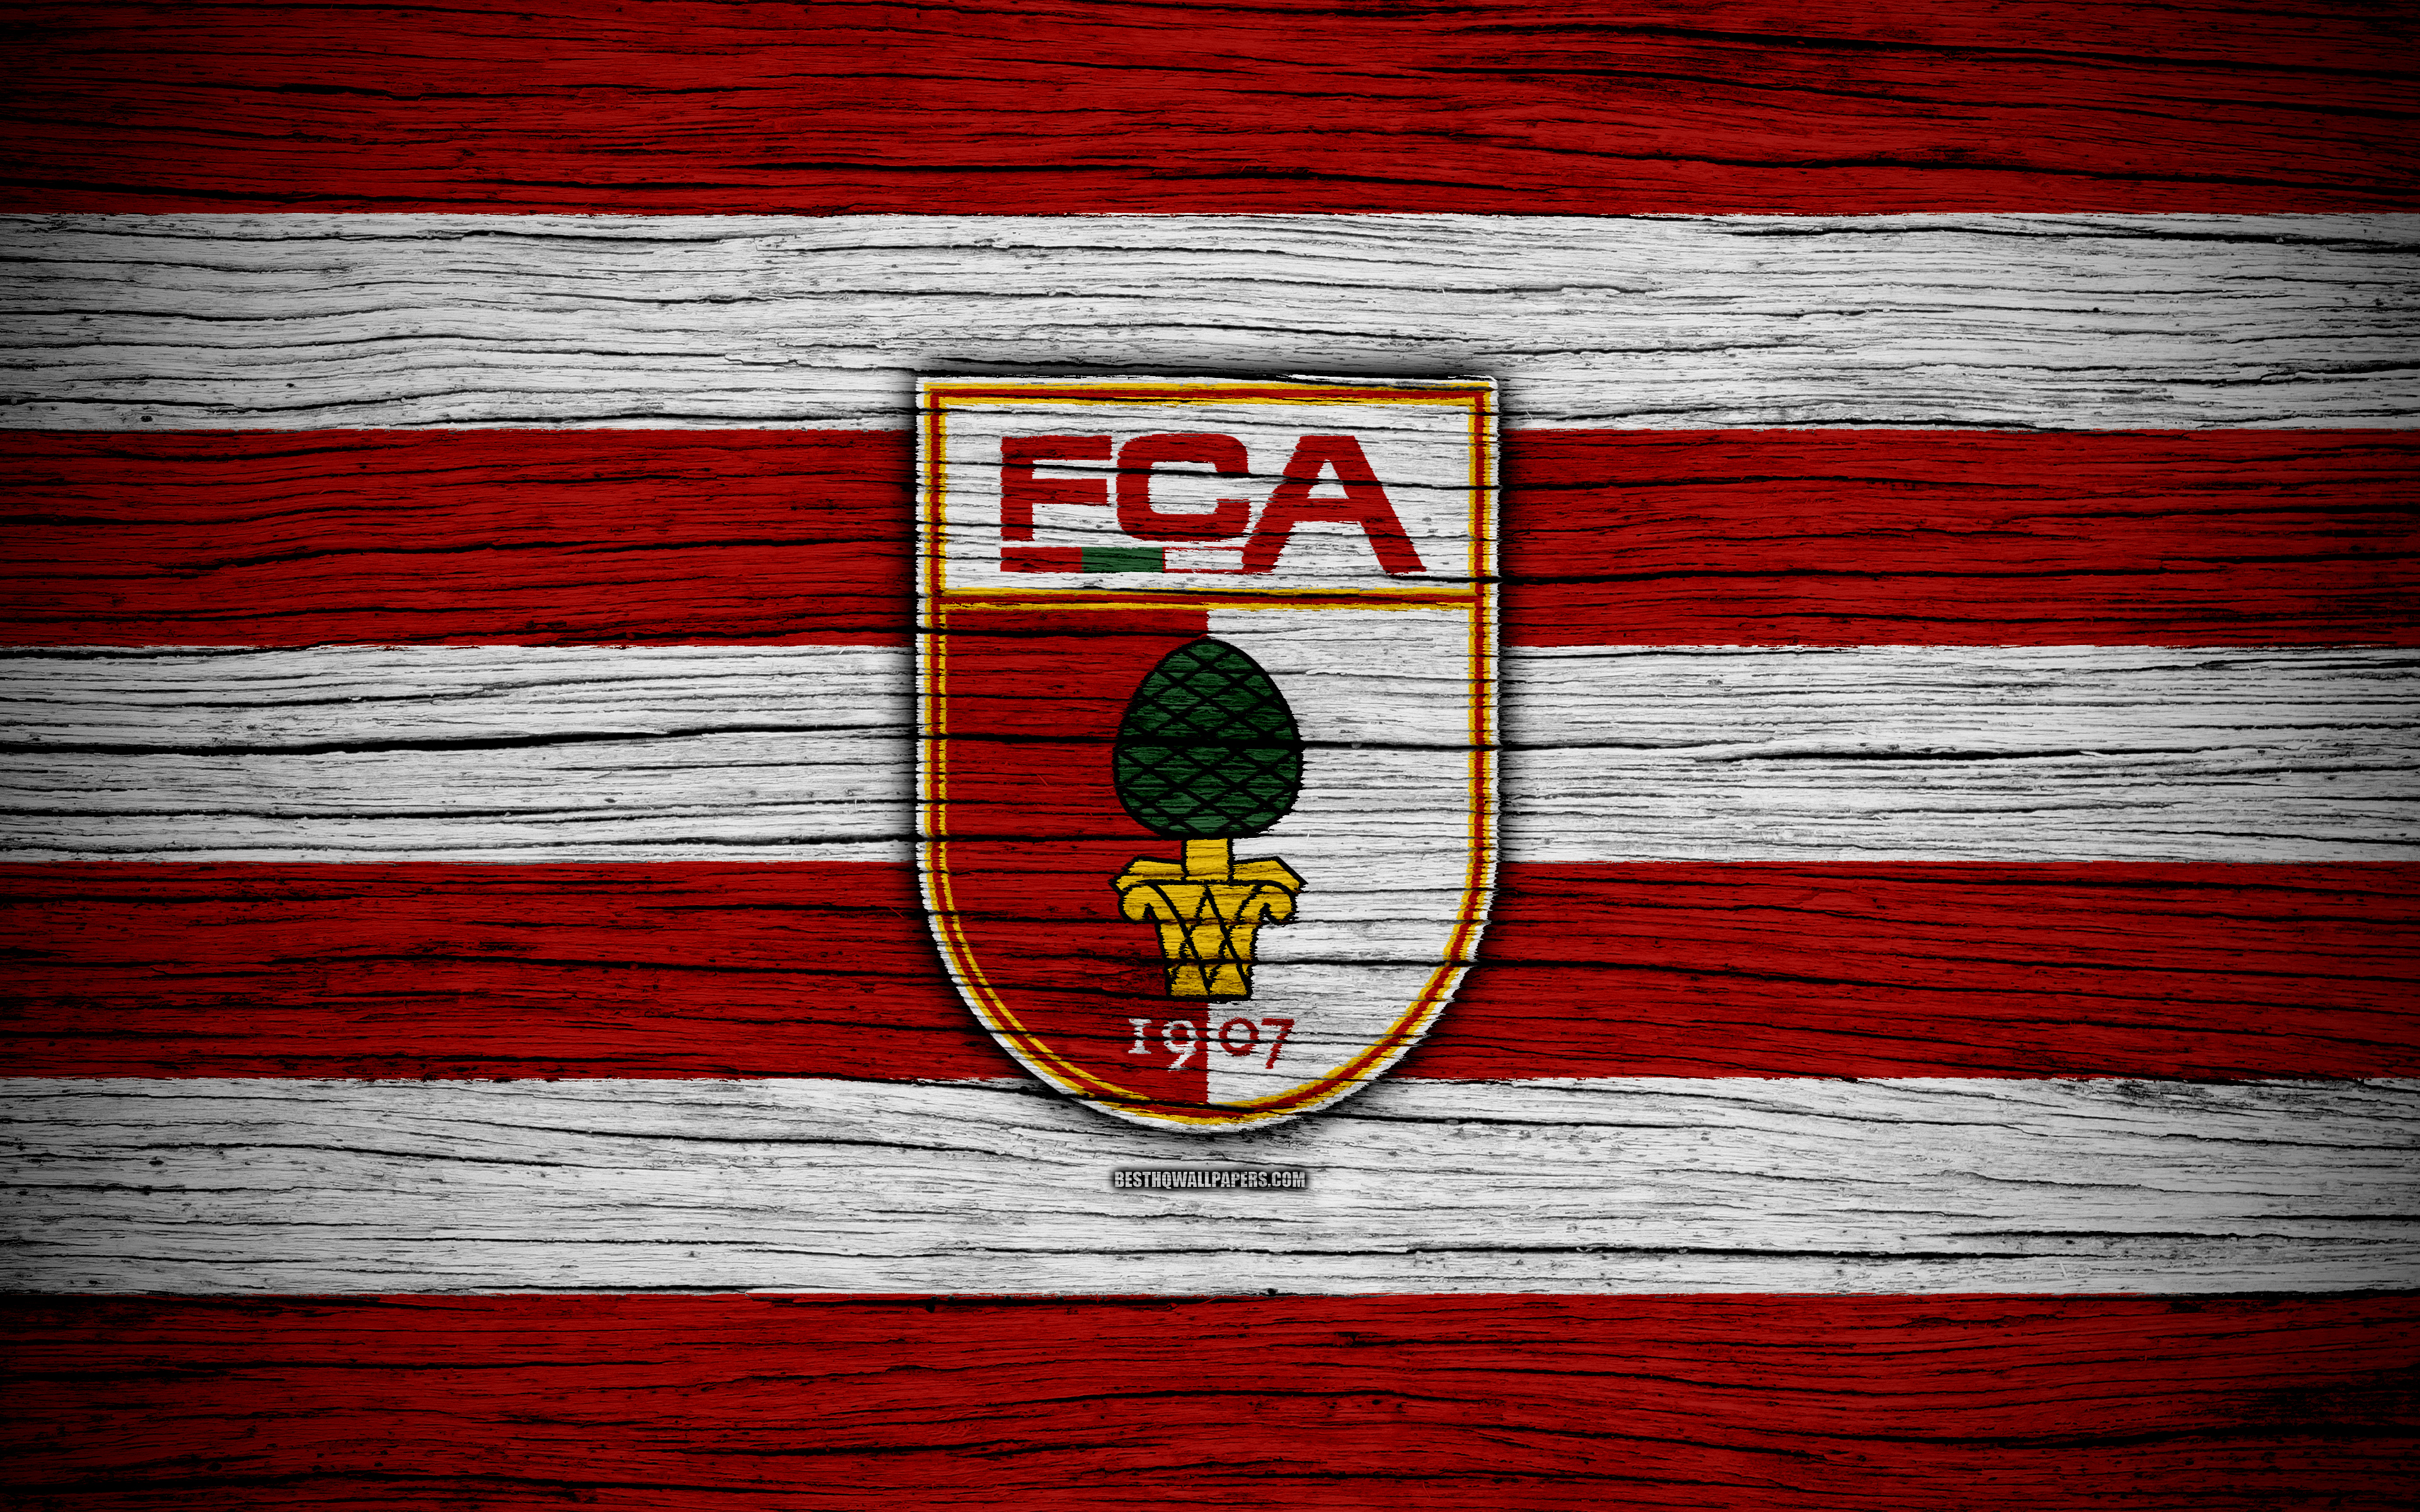 Fc Augsburg Wallpapers